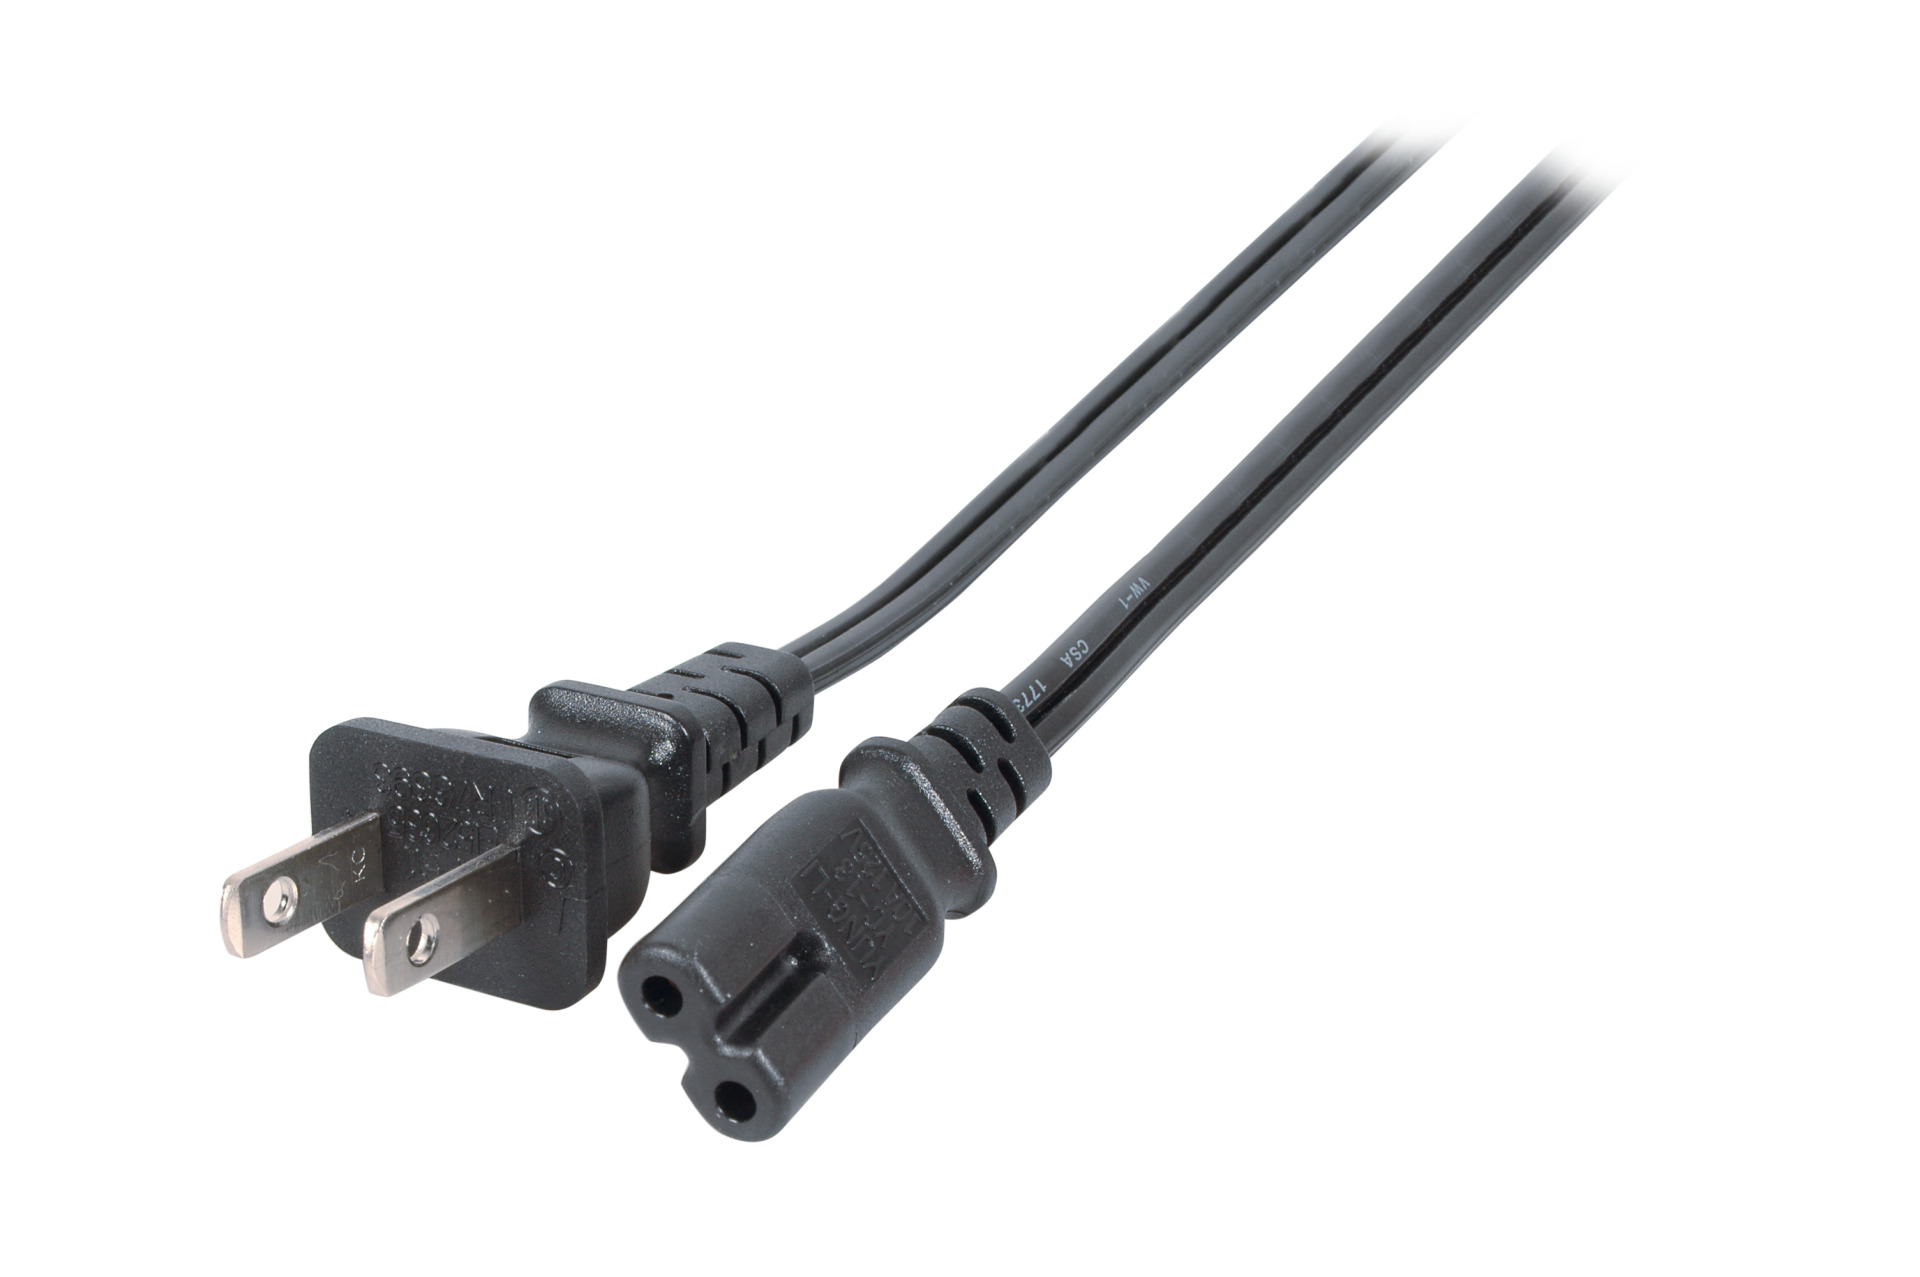 Power cable CEE 400 V 1,5mm² 5x16 A 10 metres - Esders GmbH